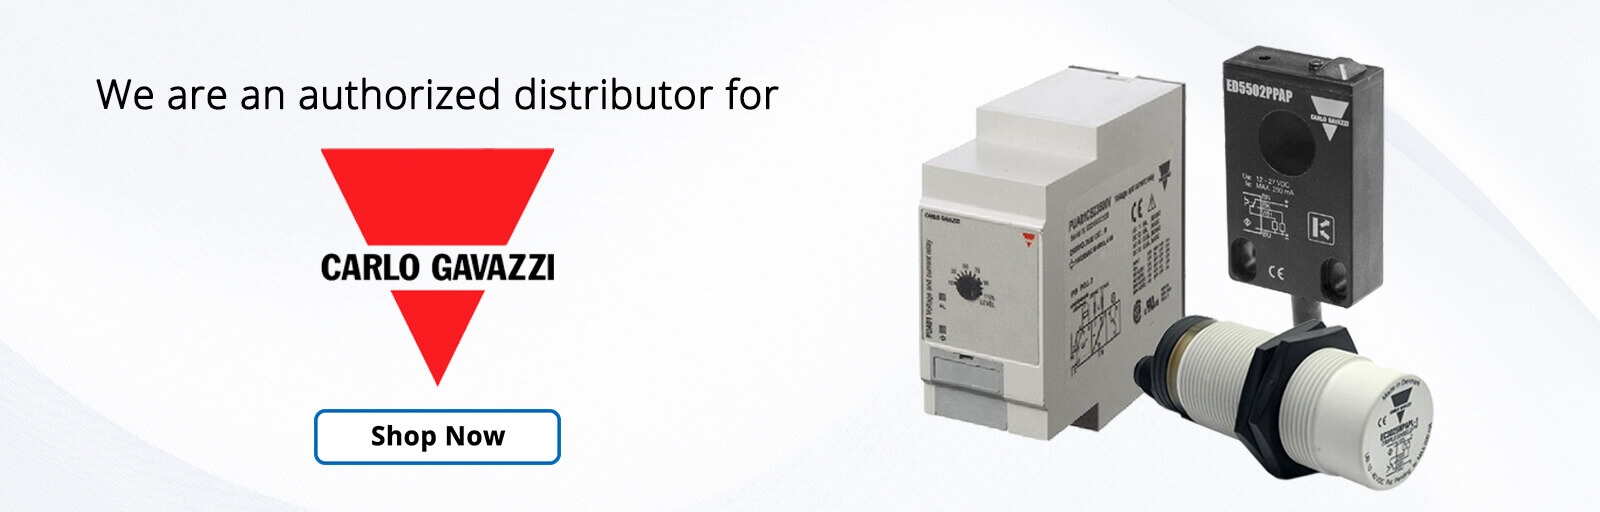 We are an authorized distributor for Carlo Gavazzi